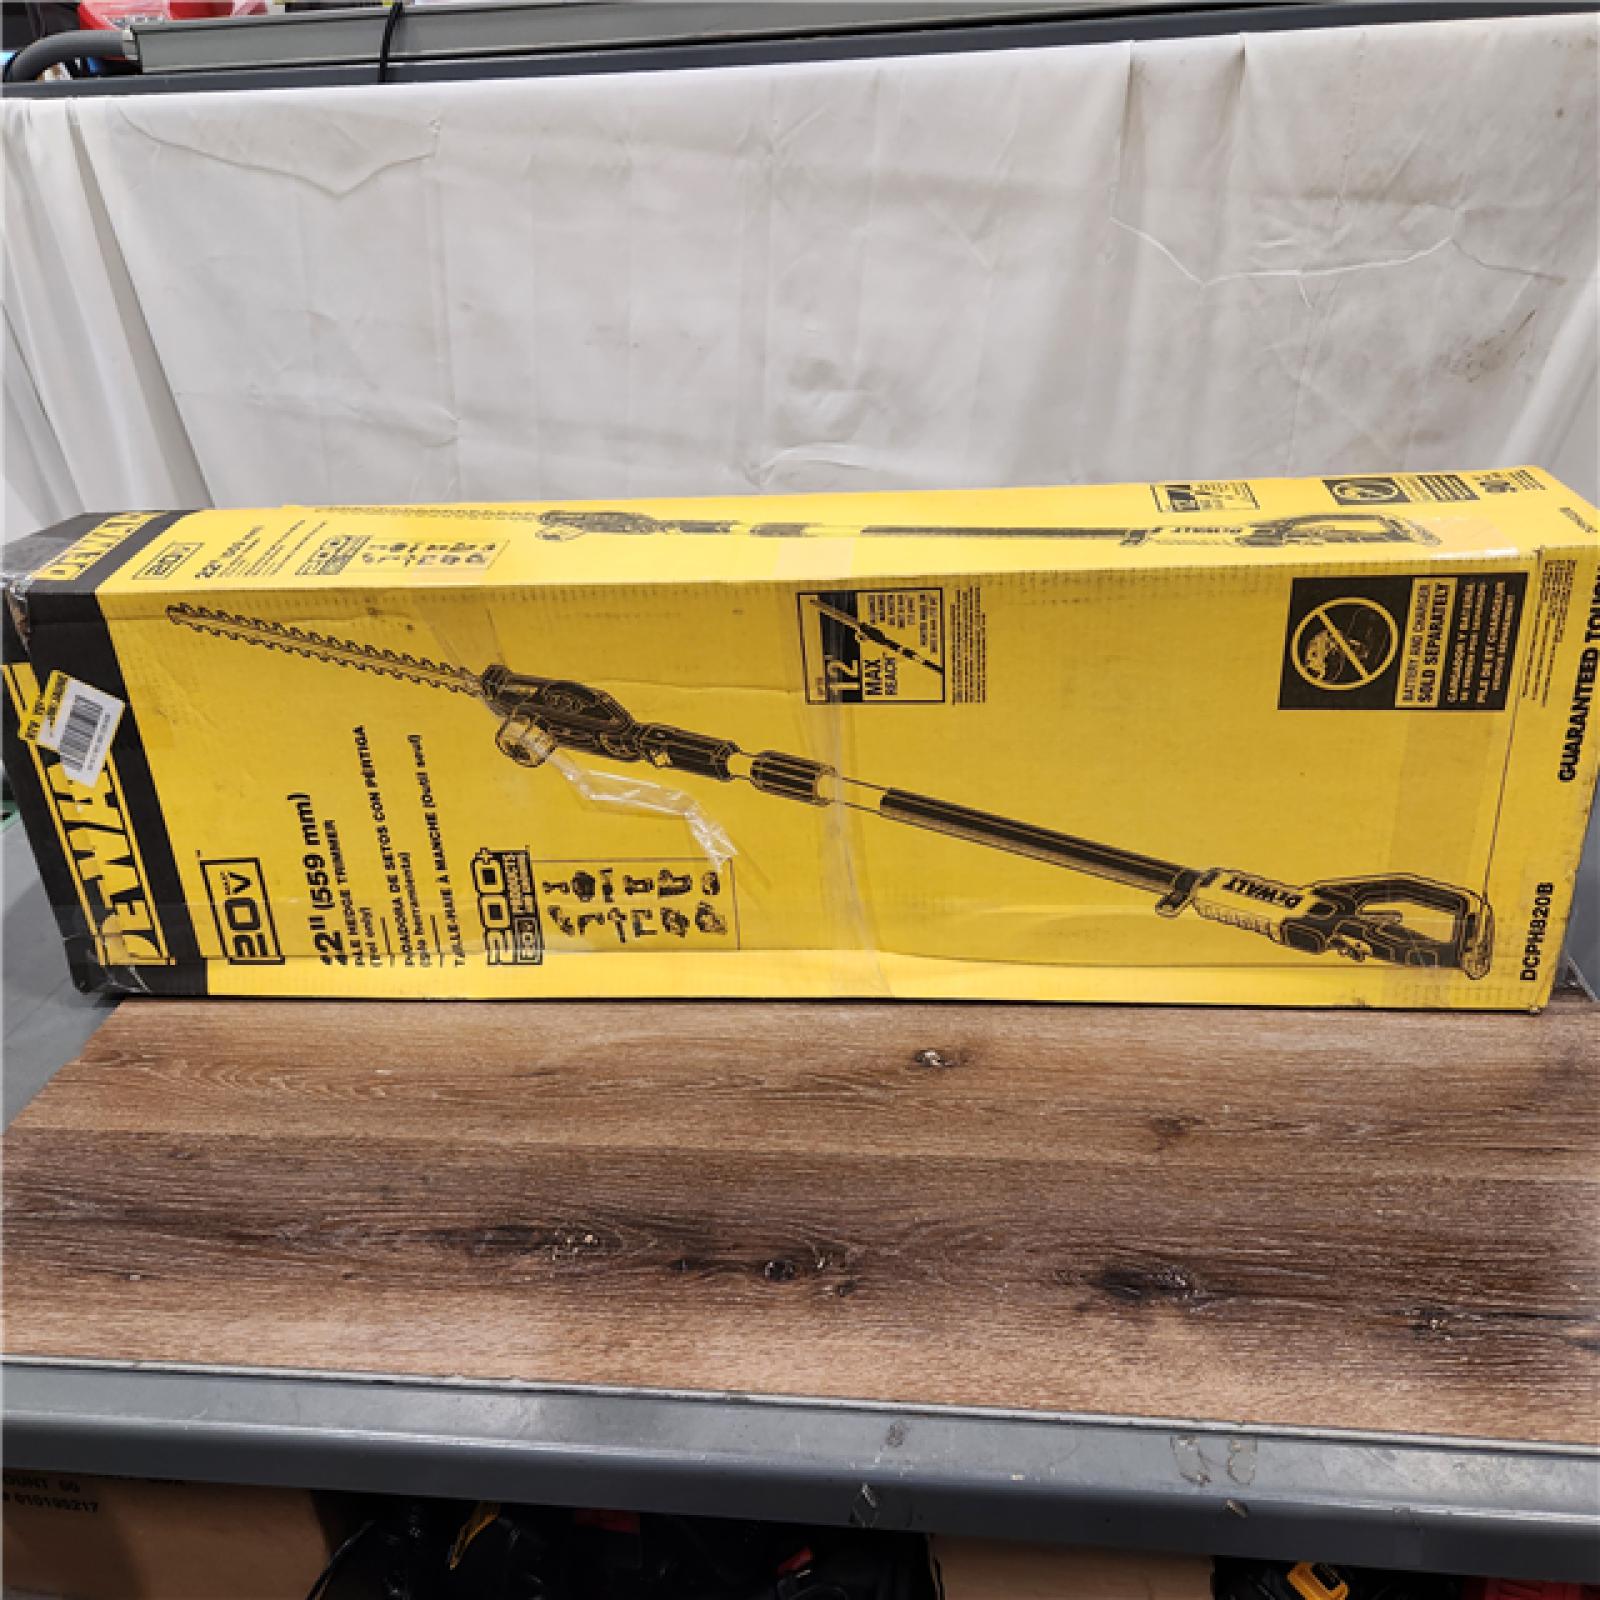 AS-IS DEWALT 20V MAX Cordless Battery Powered Pole Hedge Trimmer (Tool Only)